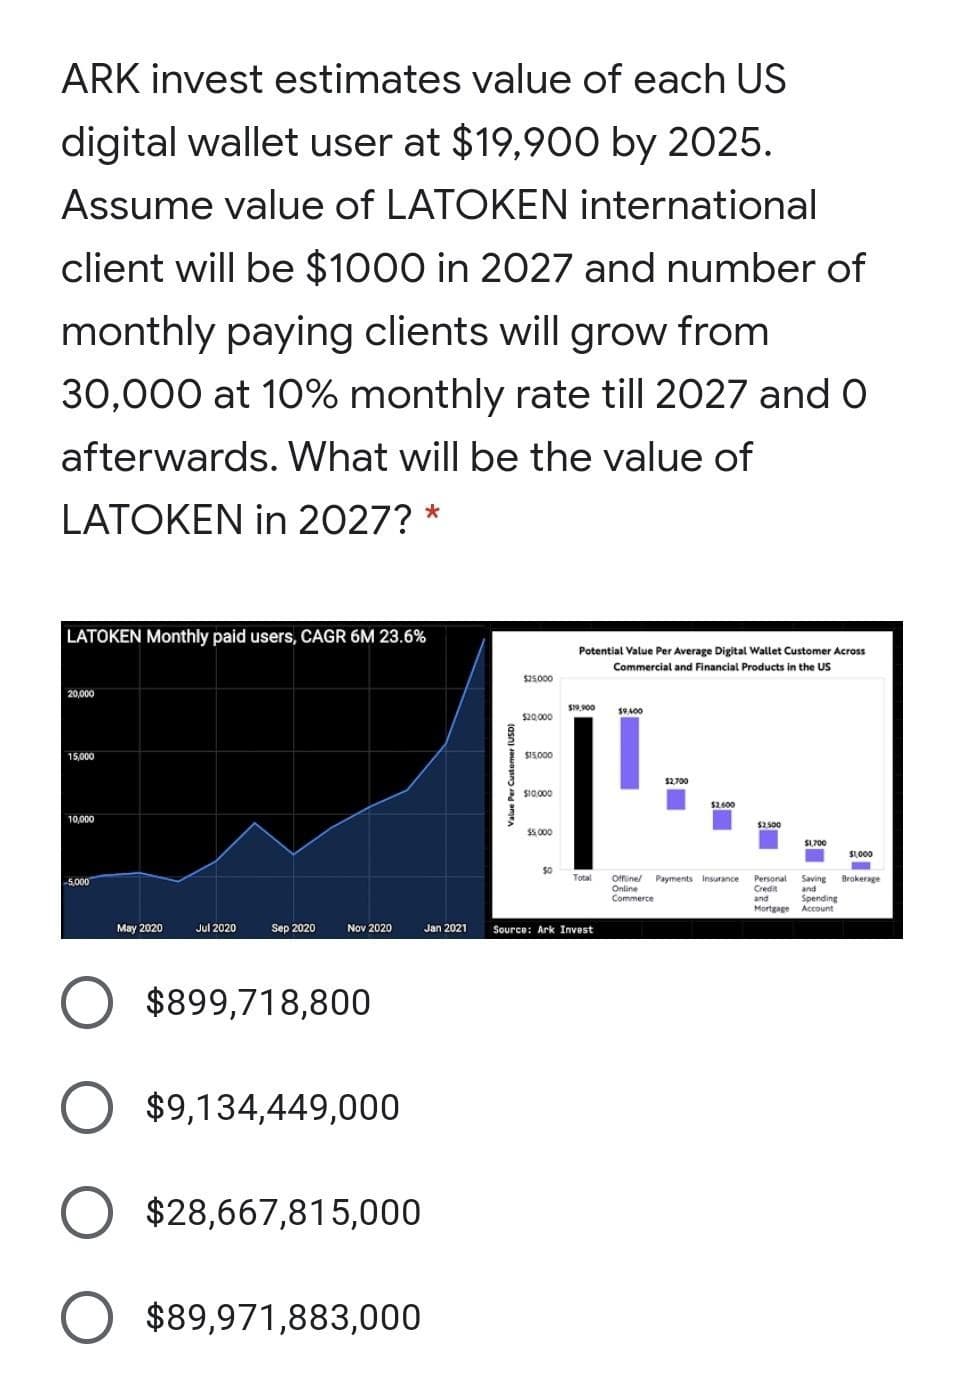 ARK invest estimates value of each US
digital wallet user at $19,900 by 2025.
Assume value of LATOKEN international
client will be $1000 in 2027 and number of
monthly paying clients will grow from
30,000 at 10% monthly rate till 2027 and 0
afterwards. What will be the value of
LATOKEN in 2027? *
LATOKEN Monthly paid users, CAGR 6M 23.6%
20,000
15,000
10,000
-5,000
May 2020
Jul 2020
Sep 2020 Nov 2020
Jan 2021
O $899,718,800
O $9,134,449,000
O $28,667,815,000
O $89,971,883,000
Value Per Customer (USD)
$25.000
$19,900
Ī
50
Total
$20,000
$15,000
$10,000
Potential Value Per Average Digital Wallet Customer Across
Commercial and Financial Products in the US
$5,000
Source: Ark Invest
$9.400
$2,700
$2,600
Offline Payments Insurance
Online
Commerce
$2,500
$1,700
$1,000
-
Personal Saving Brokerage
Credit and
and
Spending
Mortgage Account